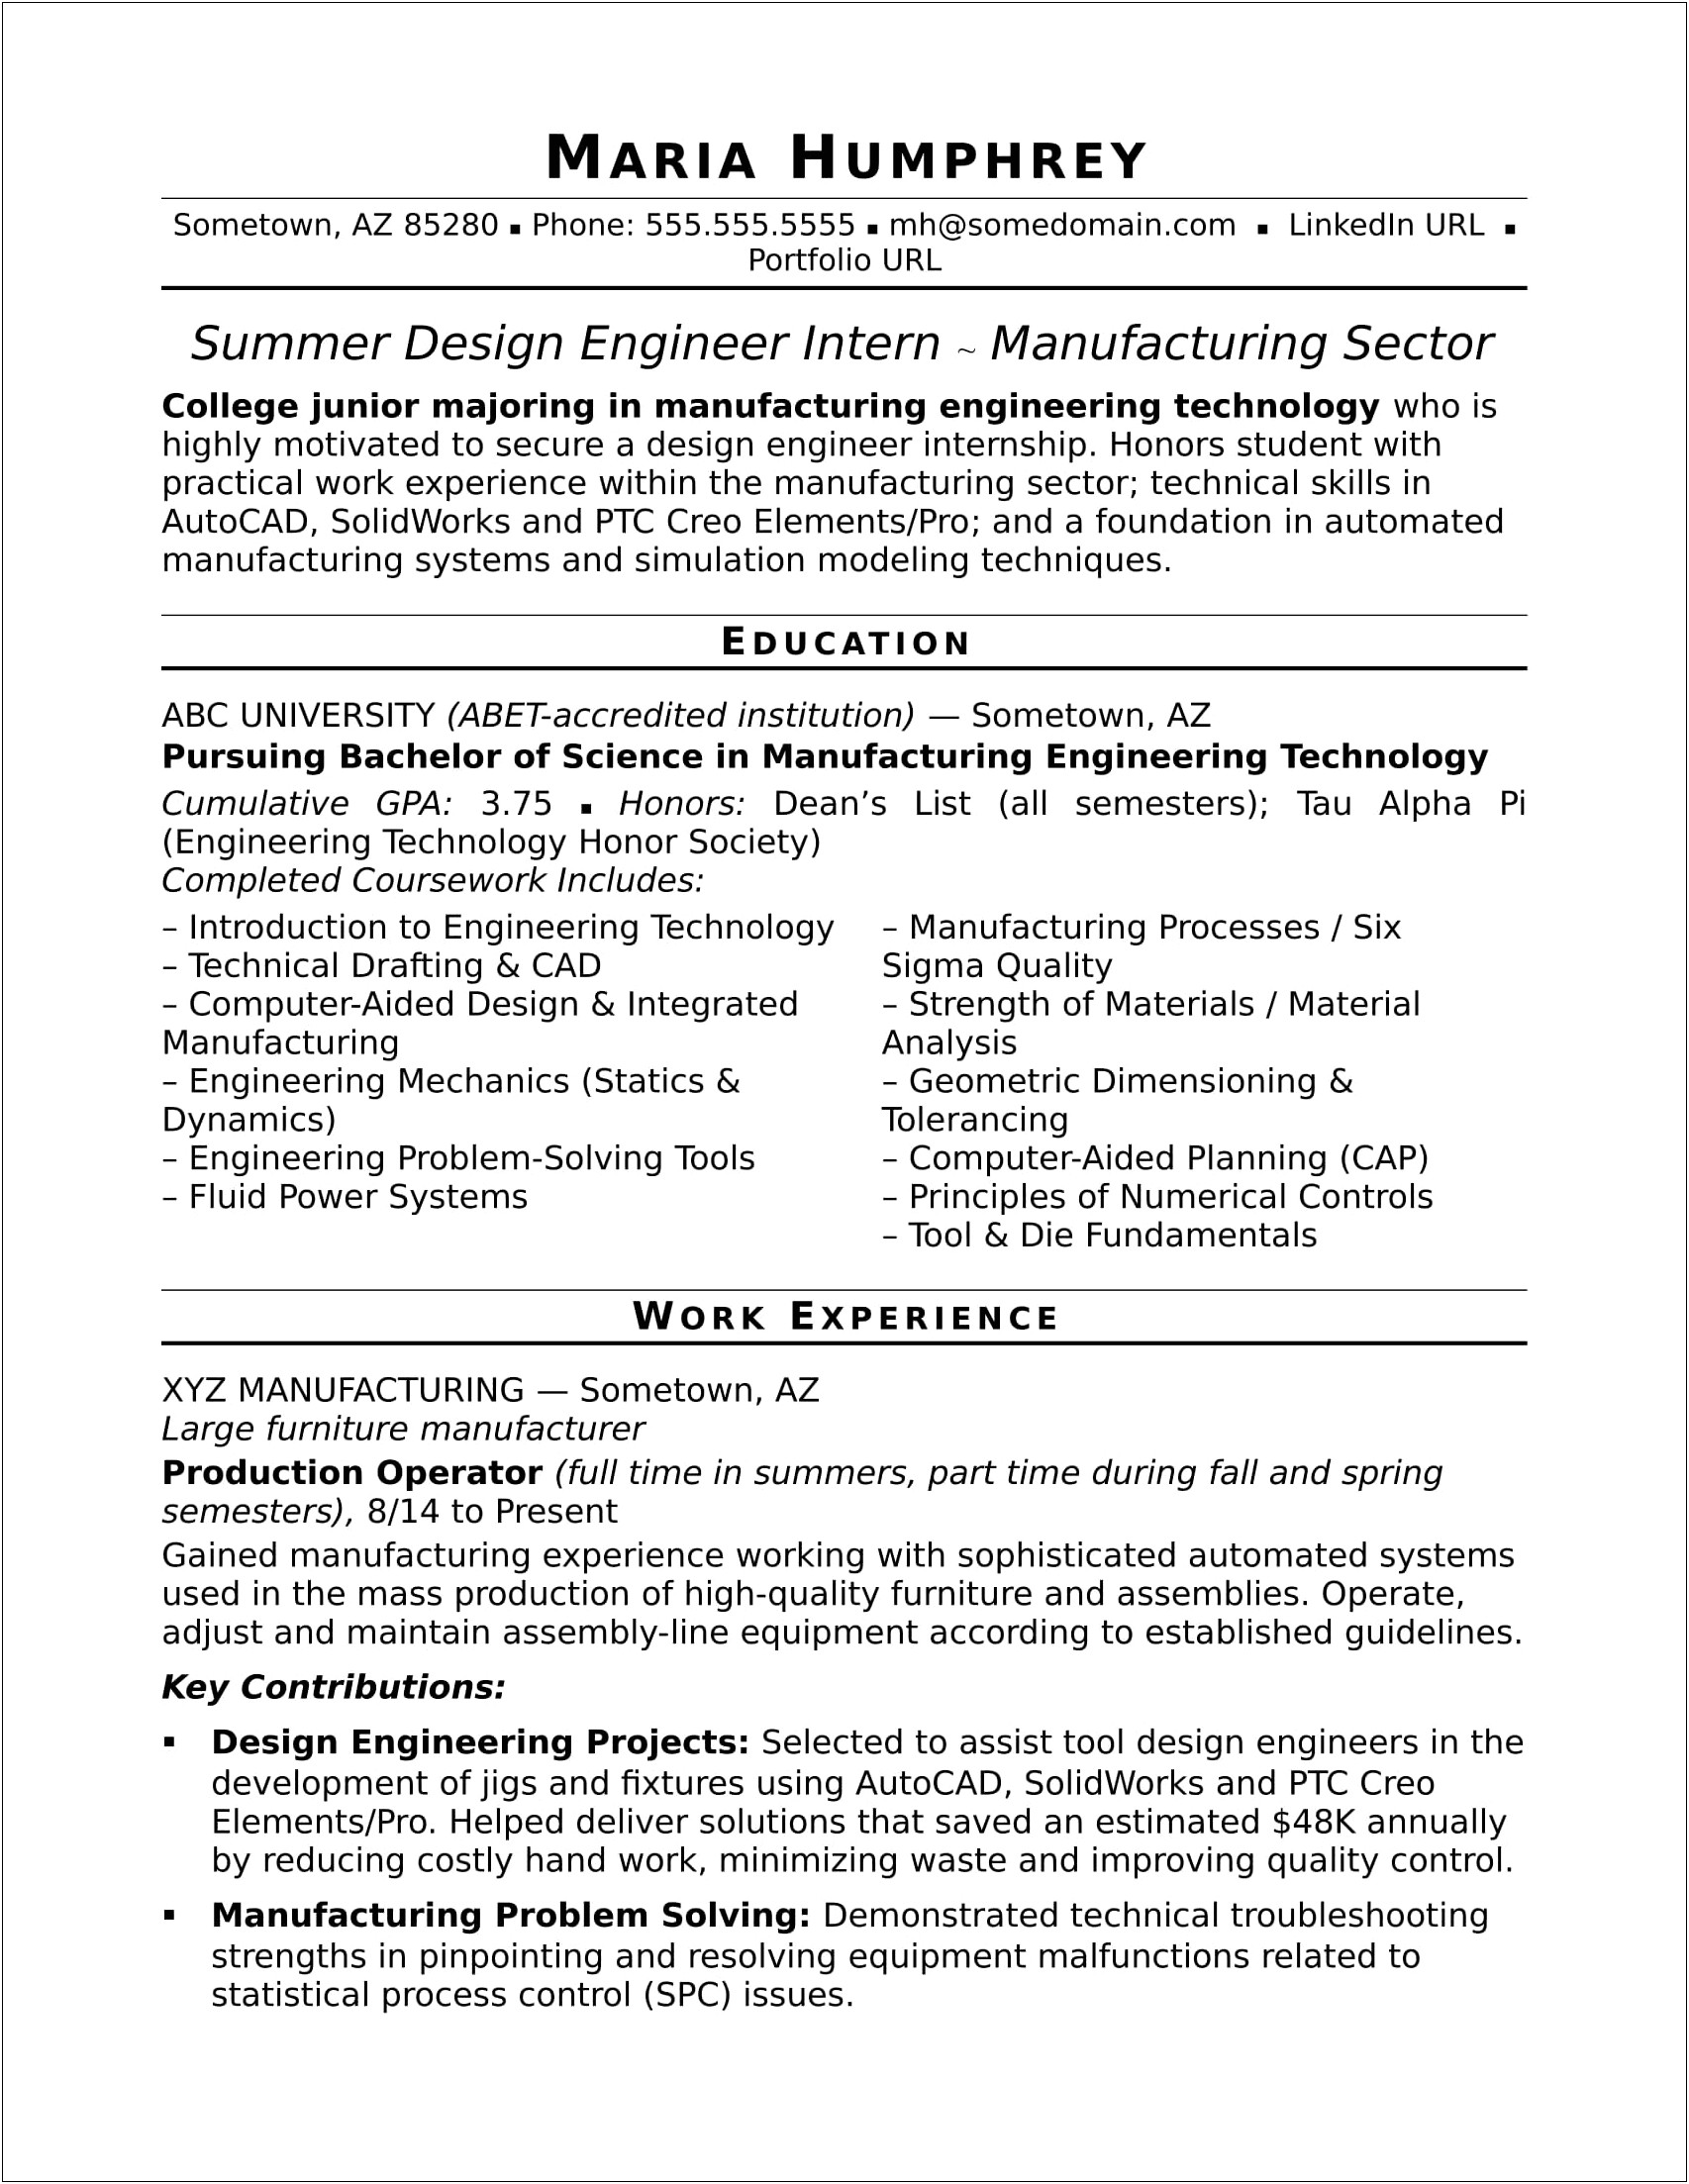 Examples Of Design Engineer Resumes